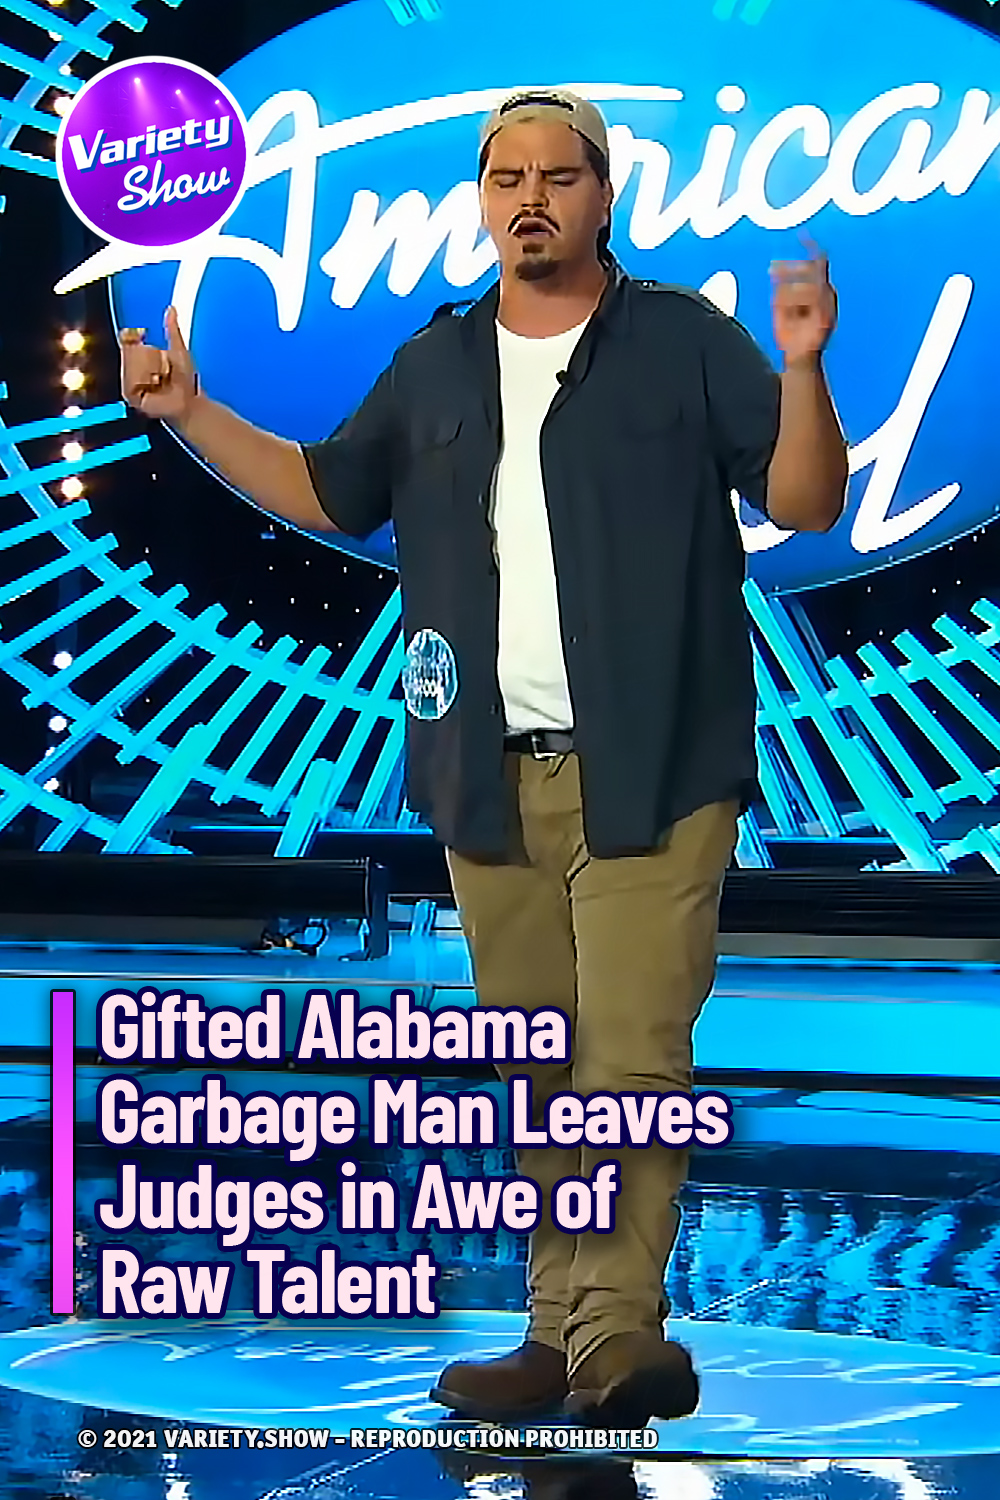 Gifted Alabama Garbage Man Leaves Judges in Awe of Raw Talent